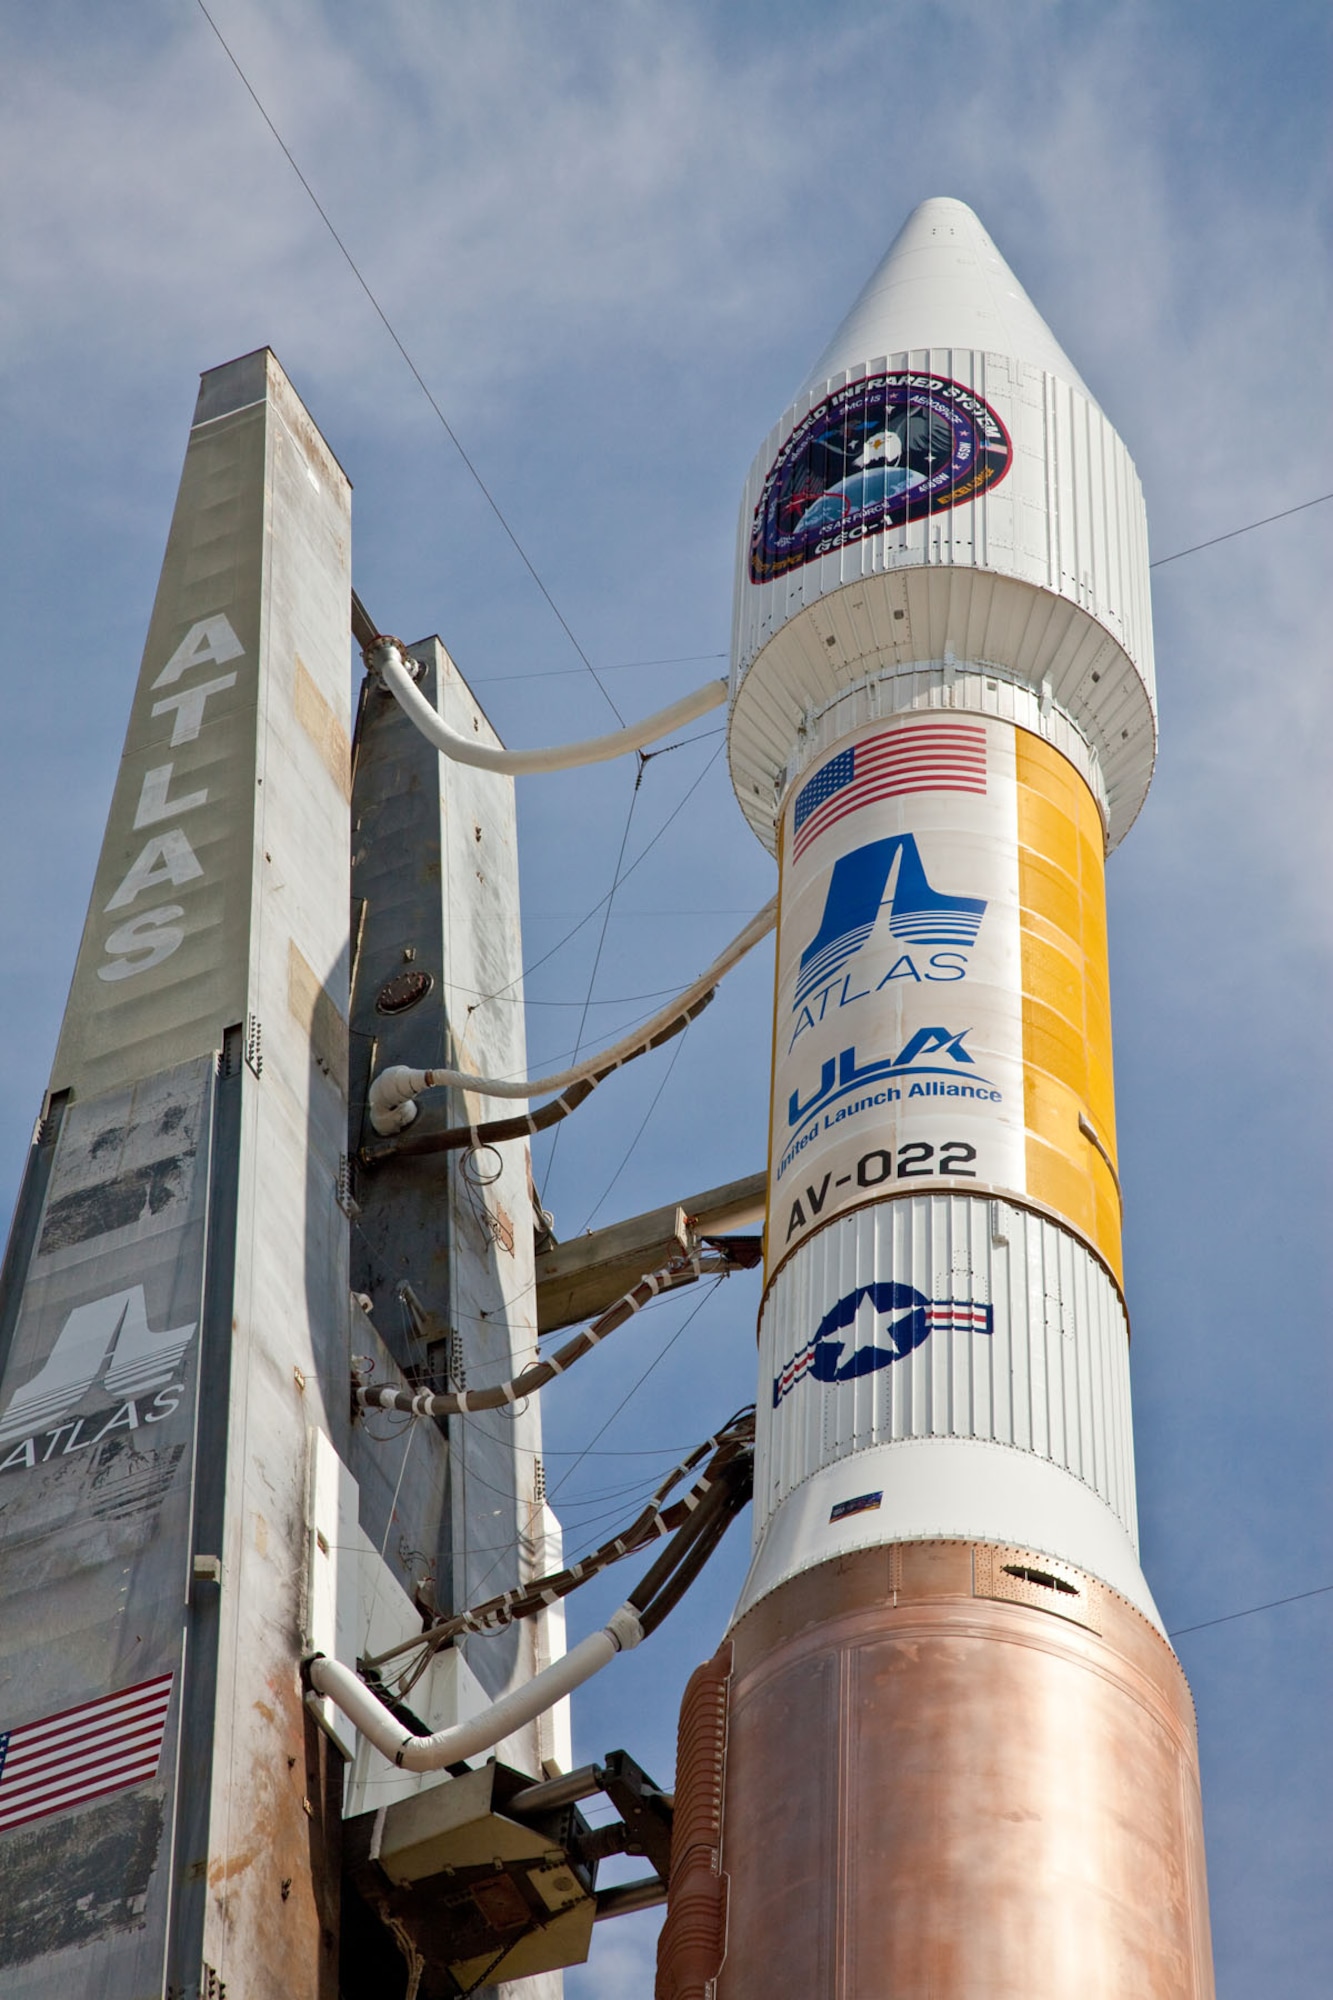 Cape Canaveral AFS, Fla. (May 5, 2011) -  A United Launch Alliance Atlas V rocket with the Air Force's Space Based Infrared Systems (SBIRS) spacecraft rolls out to its Space Launch Complex-41 launch pad arriving at 11 a.m. EDT today.  SBIRS is designed to provide global, persistent, infrared surveillance capability to meet 21st century demands in mission areas including missile warning, missile defense, technical intelligence and battlespace awareness. The launch of the SBIRS mission is set for Friday, May 6 with the launch period opening at 2:14 p.m. EDT. (Courtesy  Photo by Pat Corkery, United Launch Alliance.)